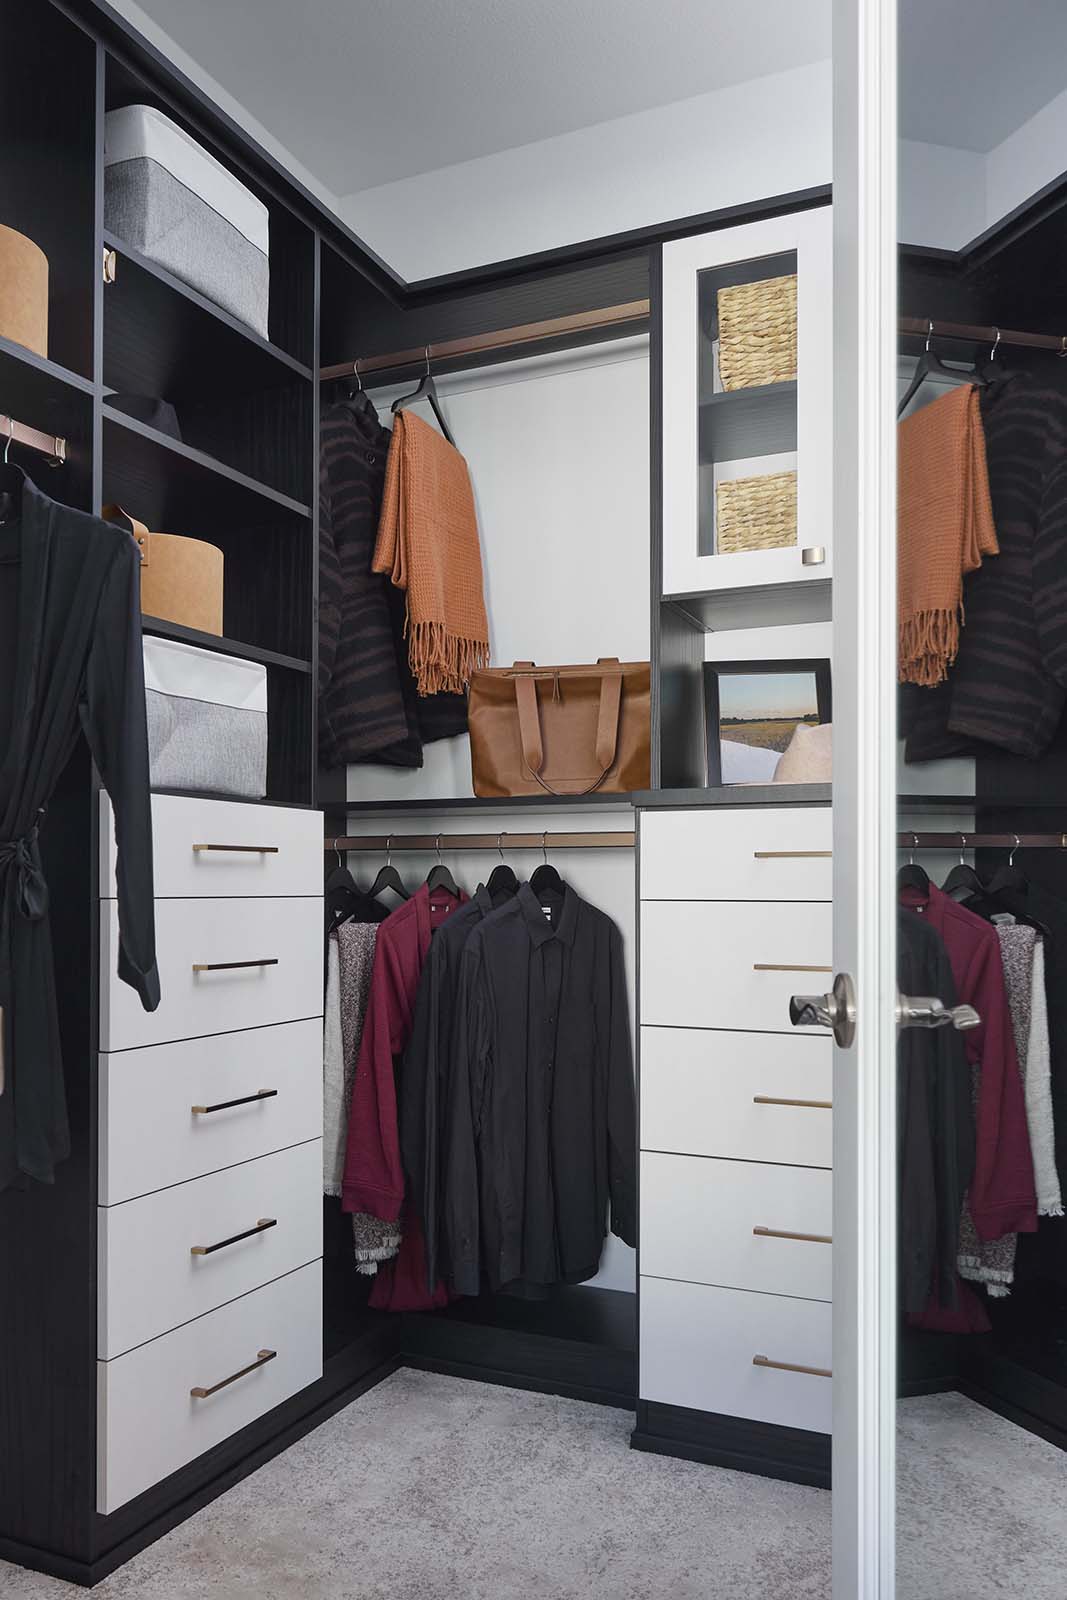 Primary Walk-In Closet - Plan 1 | Discovery at Sommers Bend